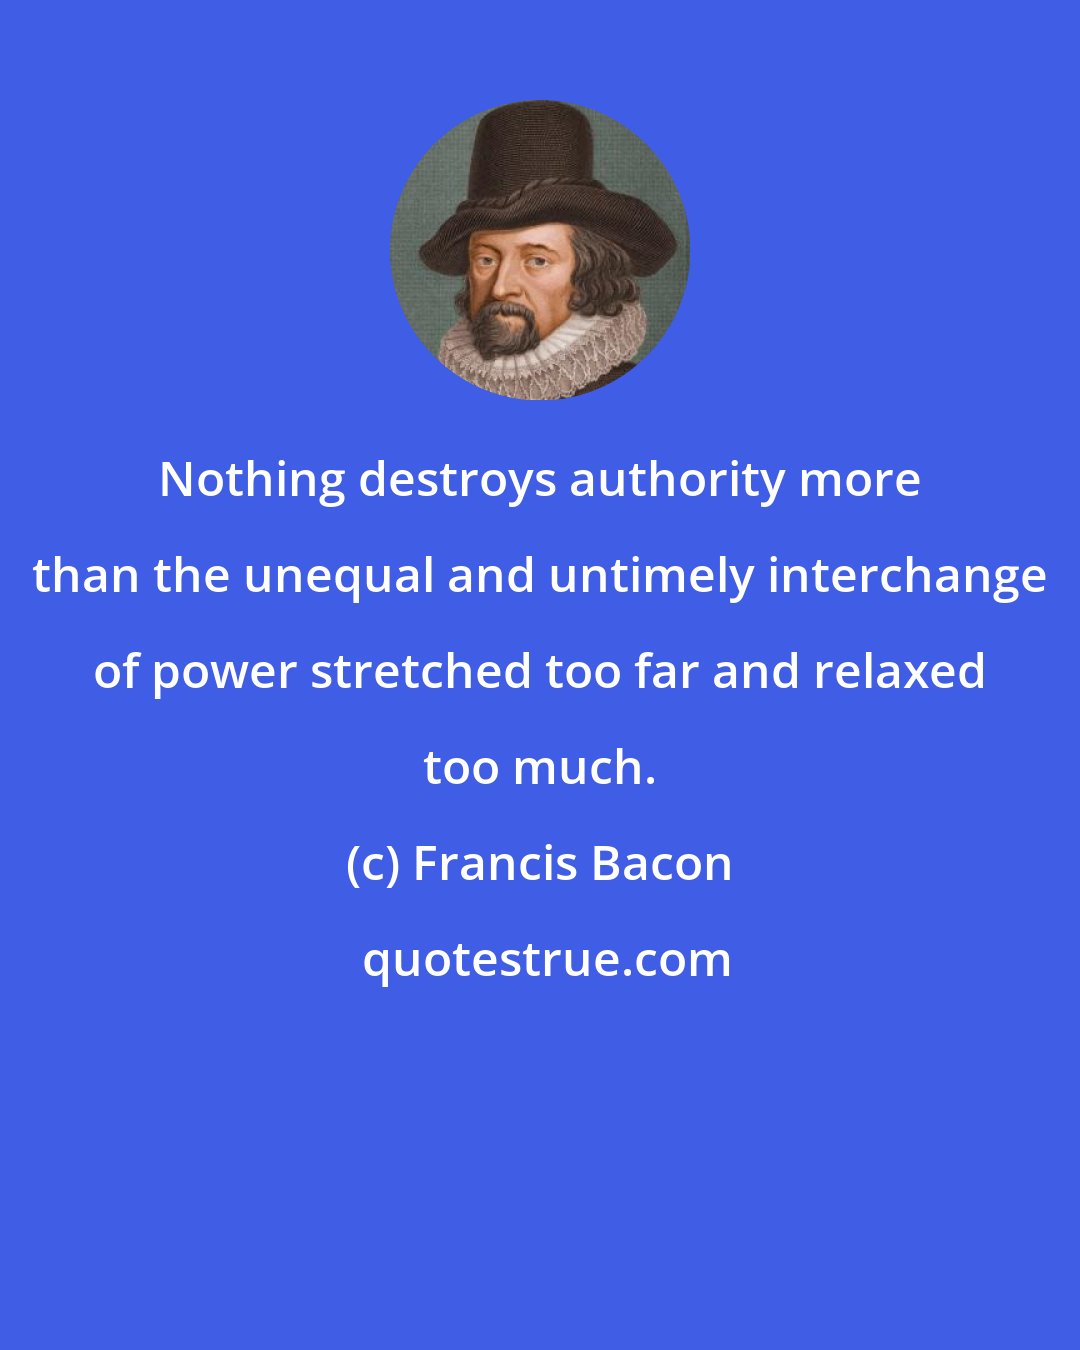 Francis Bacon: Nothing destroys authority more than the unequal and untimely interchange of power stretched too far and relaxed too much.